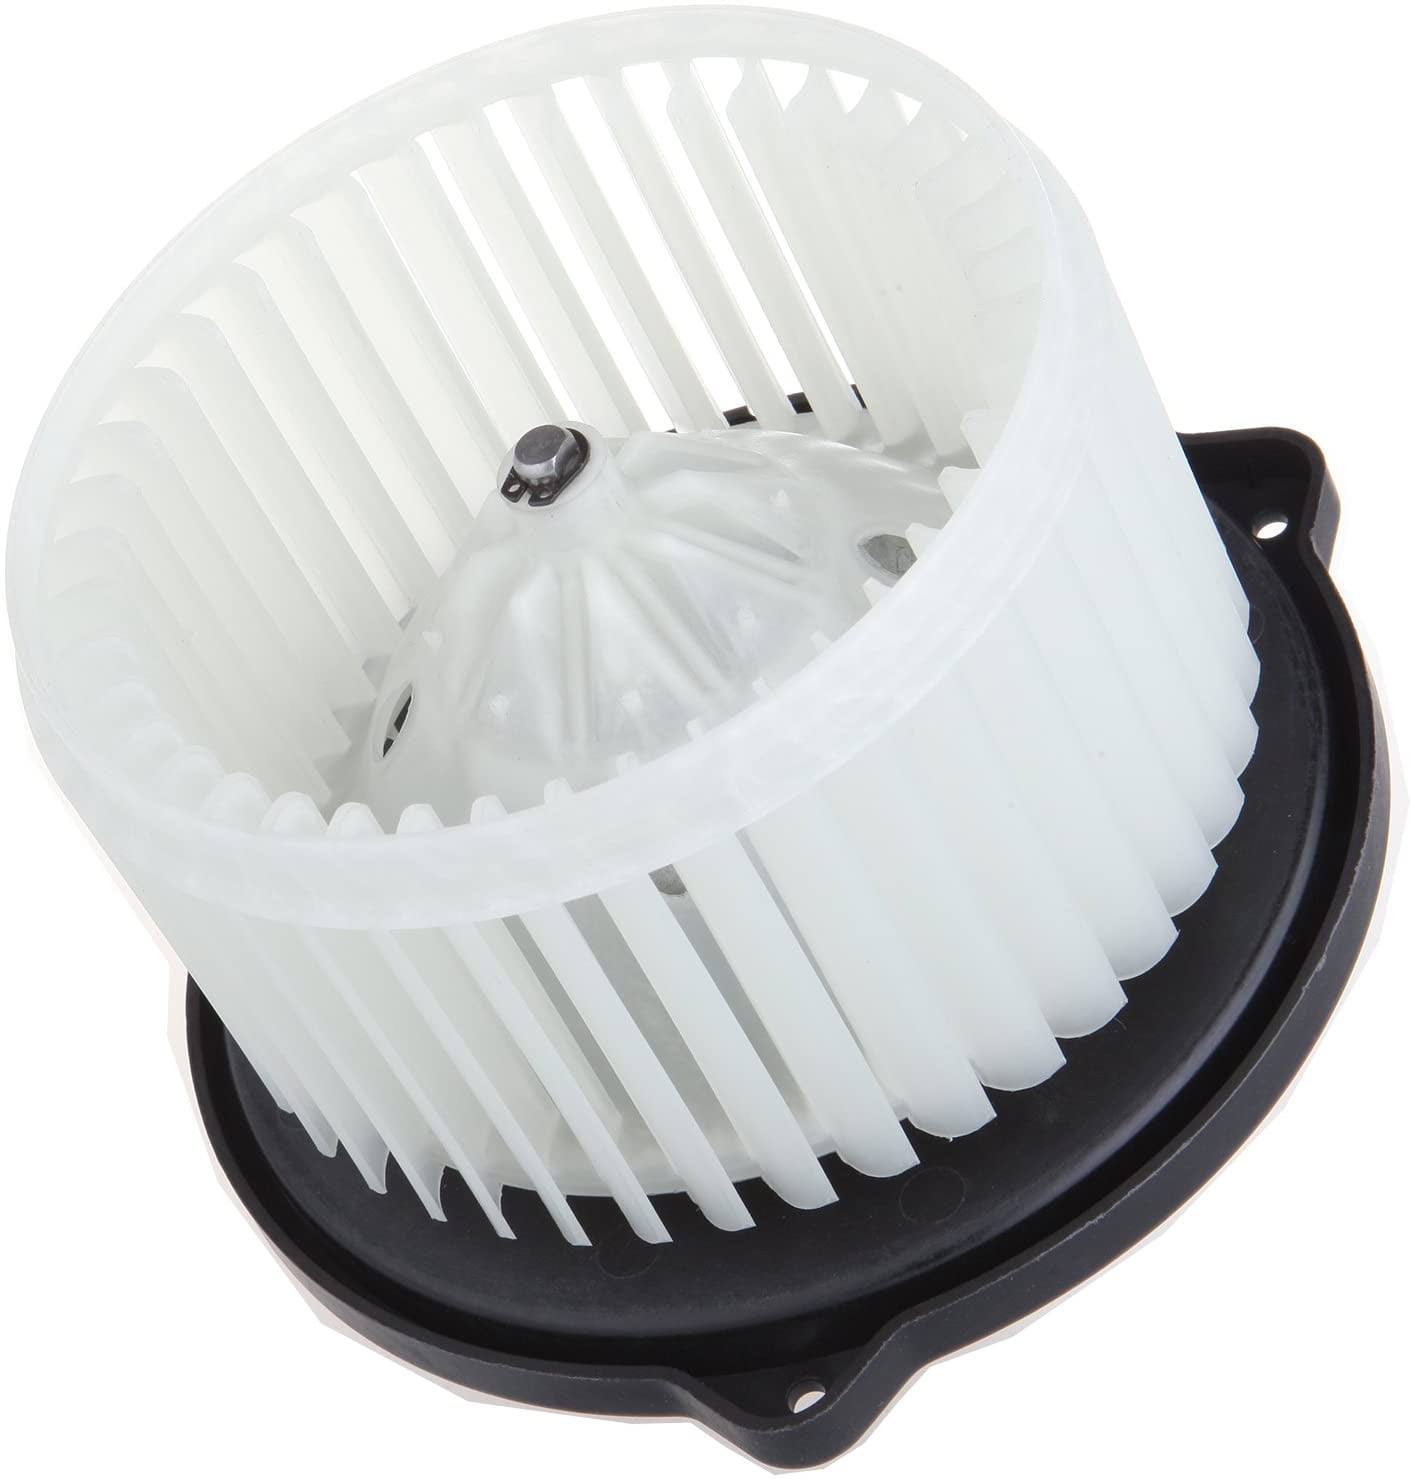 1995-2004 Toyota Tacoma 8710304030 700059 8710352060 Youxmoto ABS plastic Heater Blower Motor with Fan Cage Air Conditioning Blowers Motors fit for 2000-2005 Toyota Echo